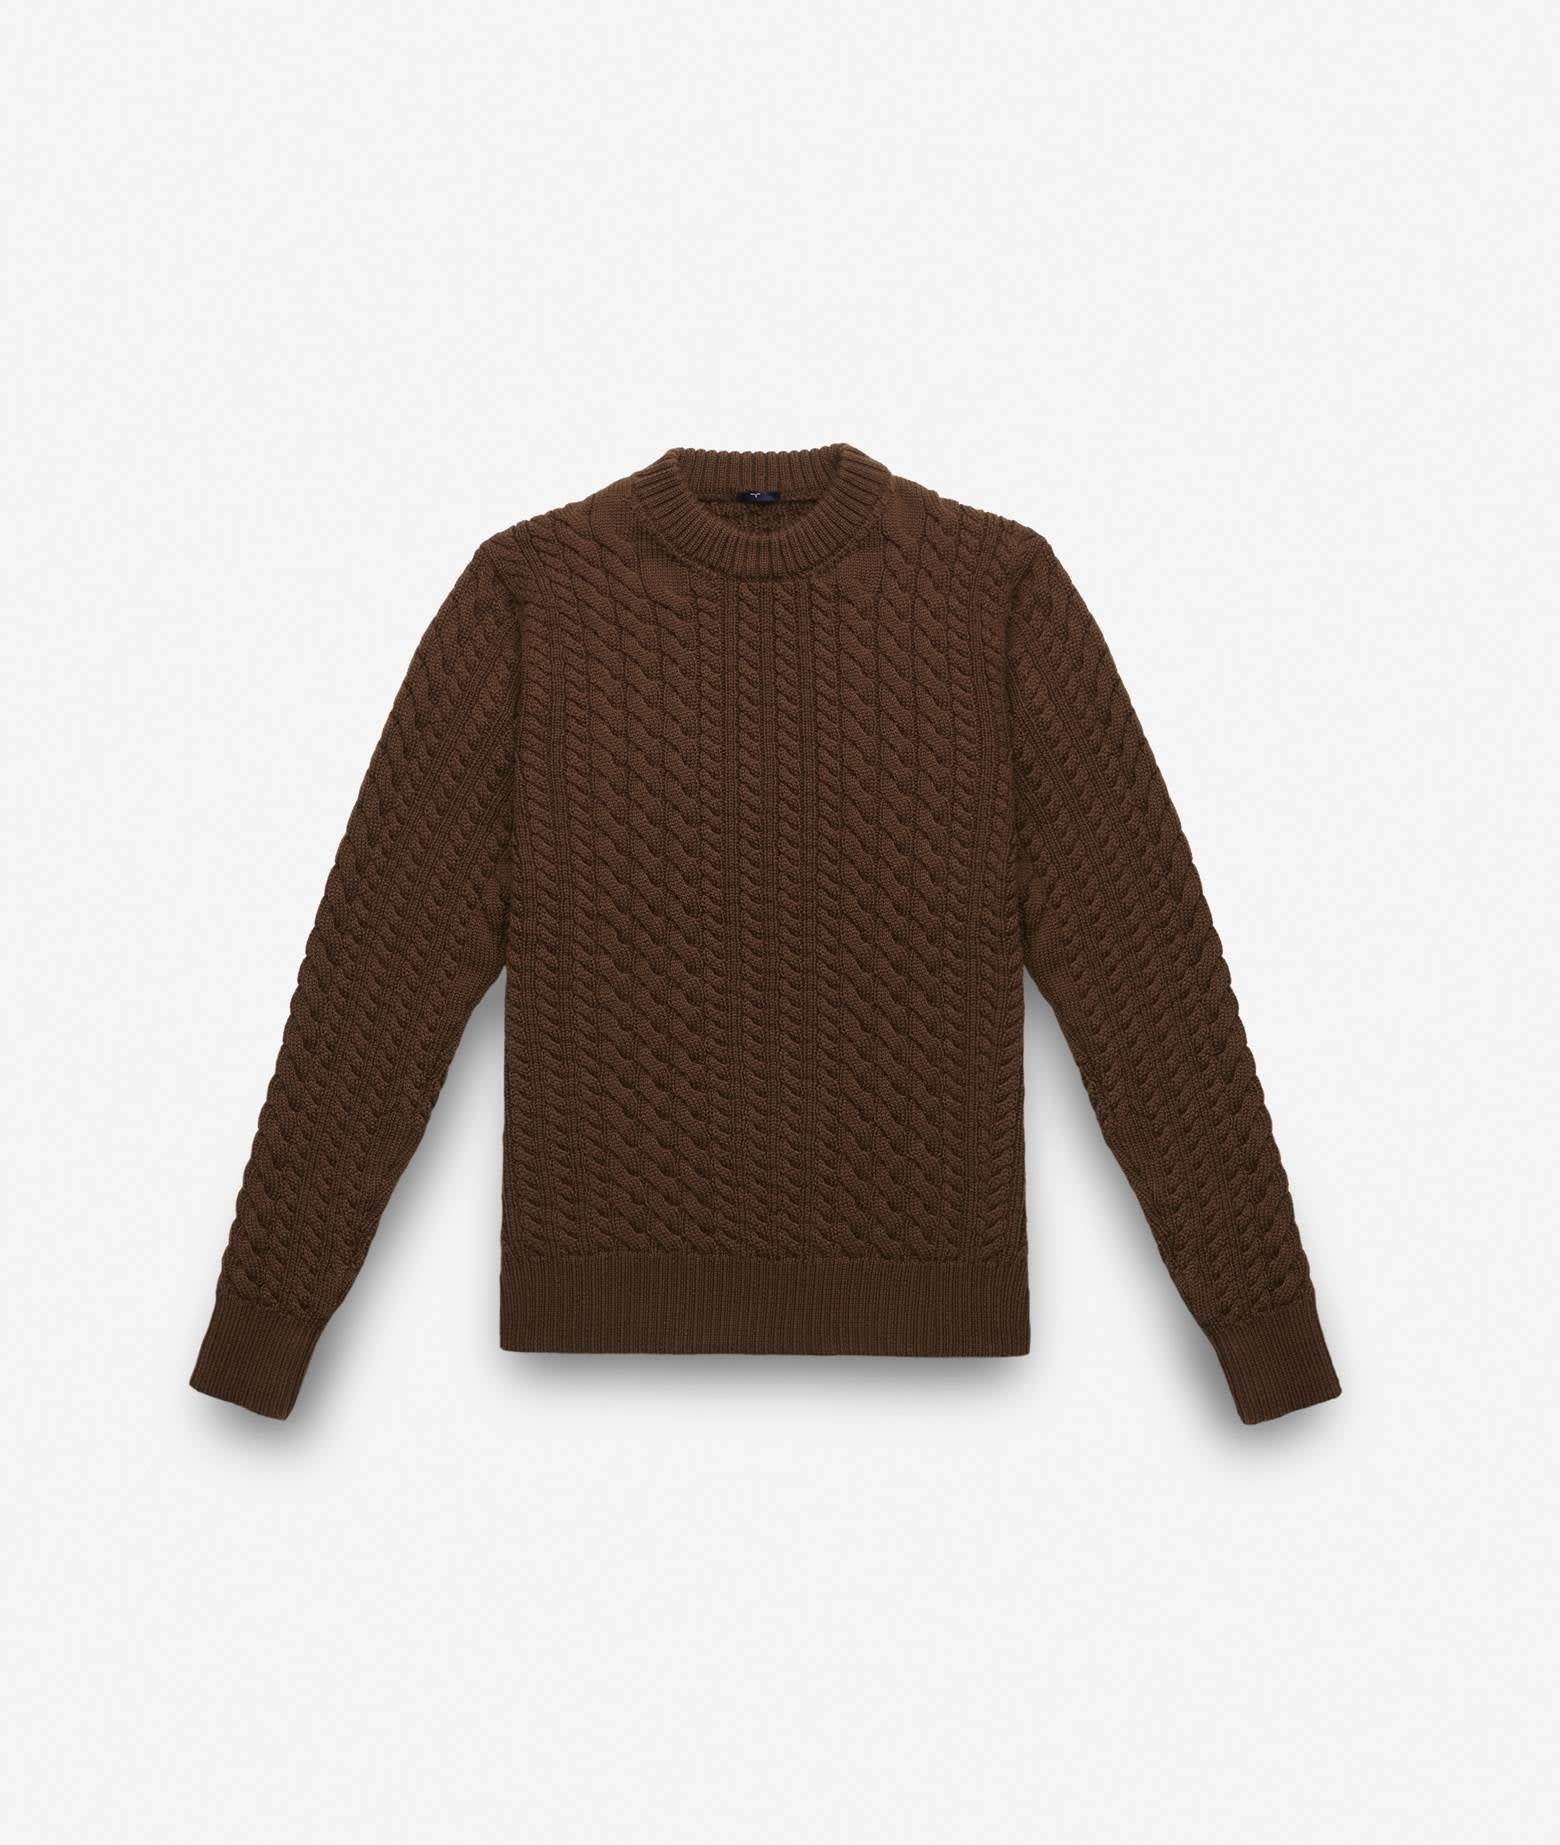 Larusmiani Cable Knit Sweater Col Du Pillon Sweater In Brown